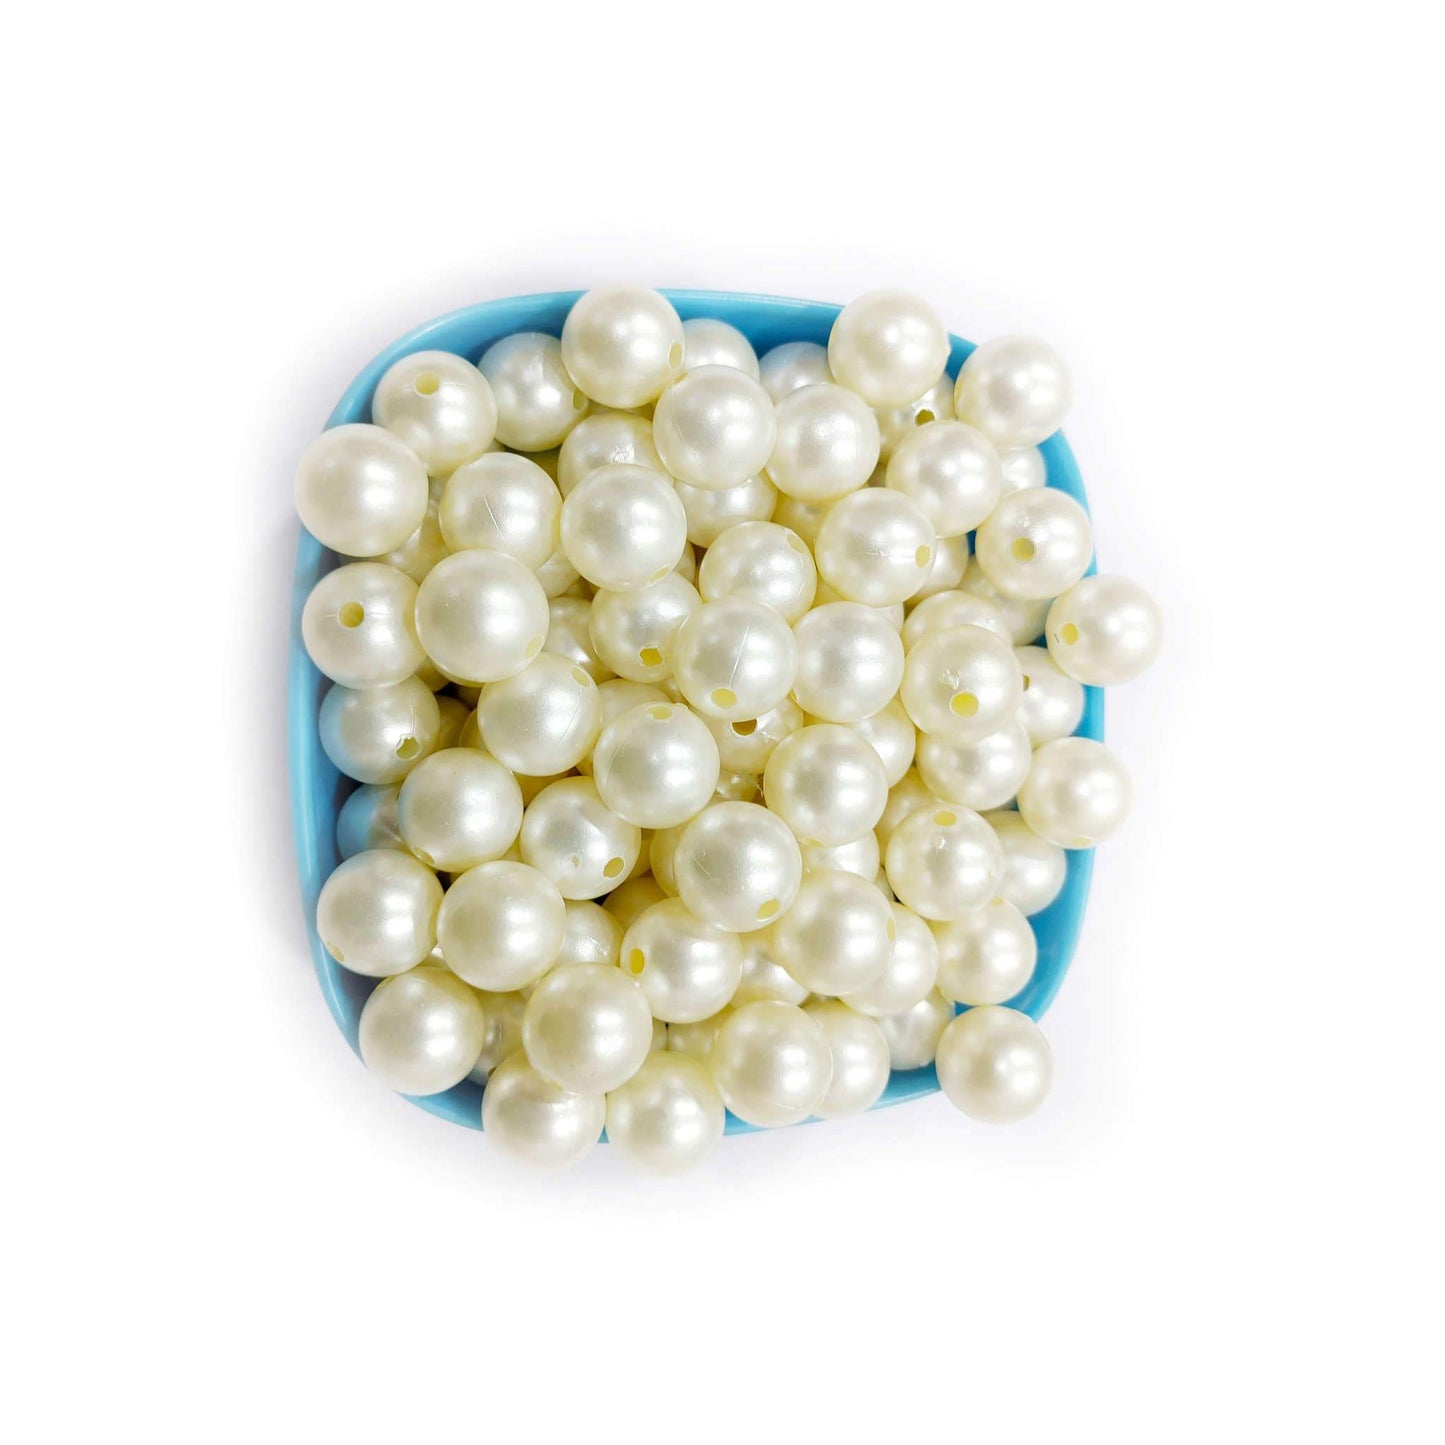 Indian Petals Premium quality round Pearl Beads for DIY Craft, Trousseau Packing or Decoration - Design 601